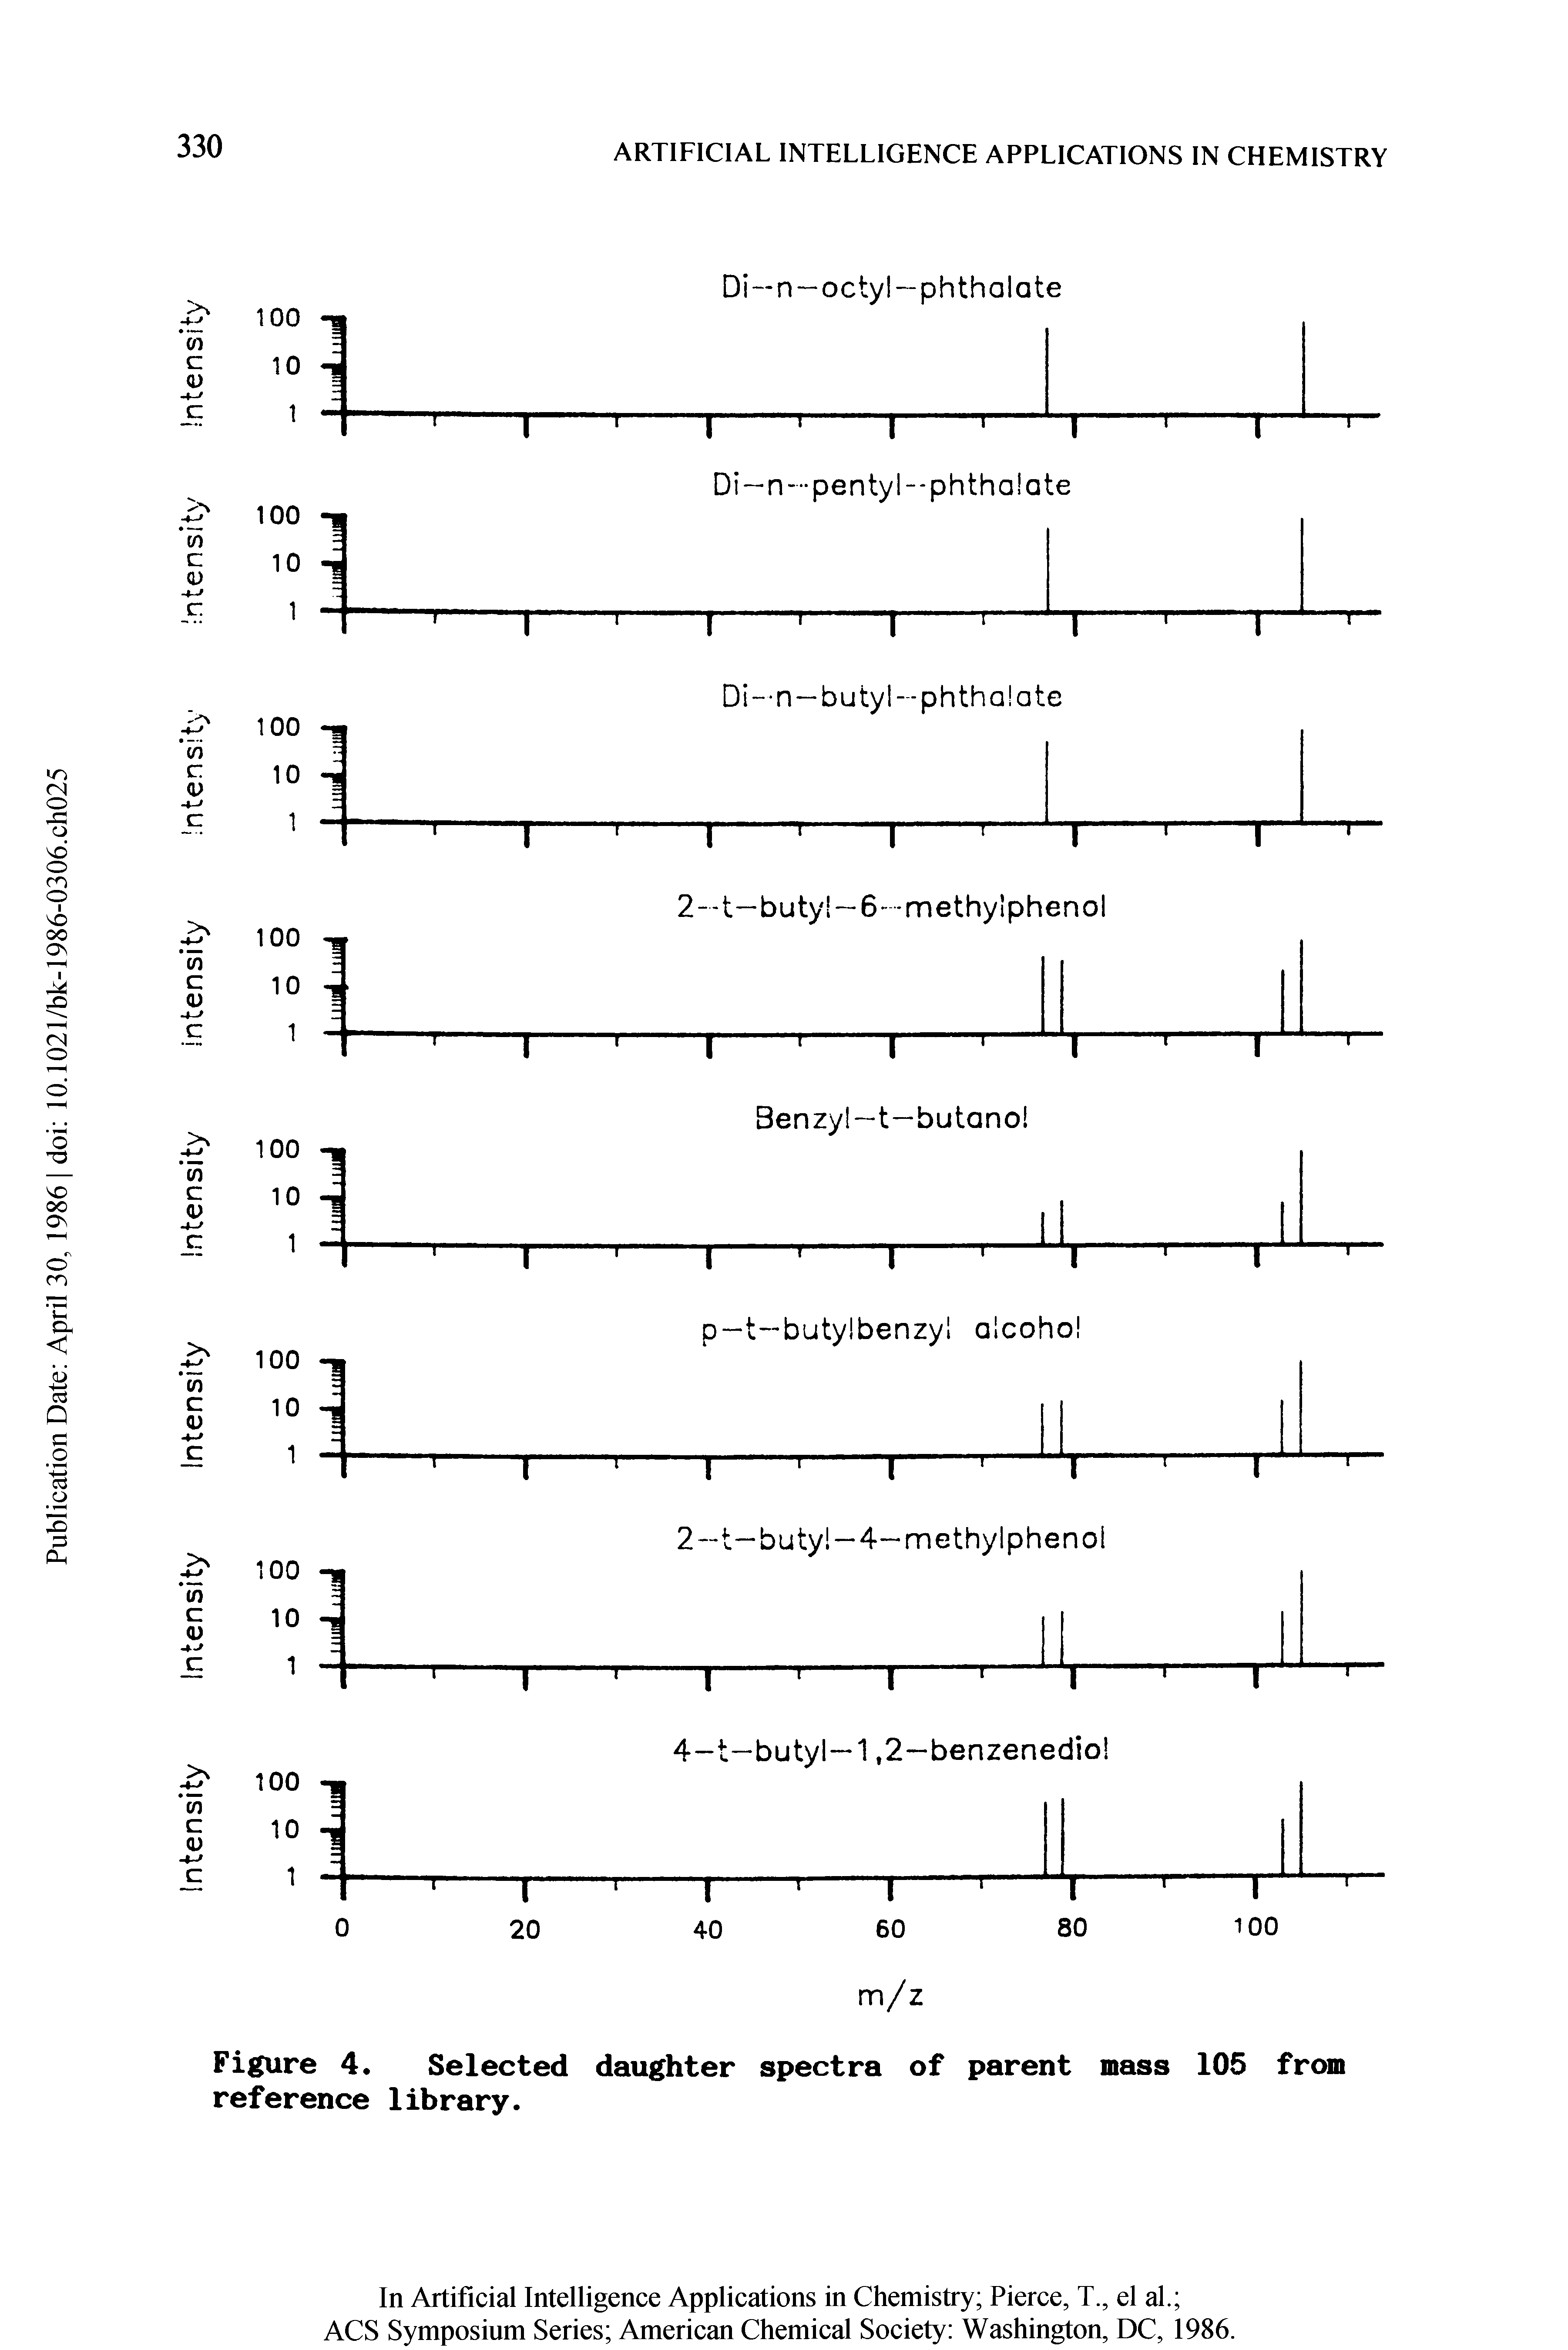 Figure 4, Selected daughter spectra of parent mass 105 from reference library.